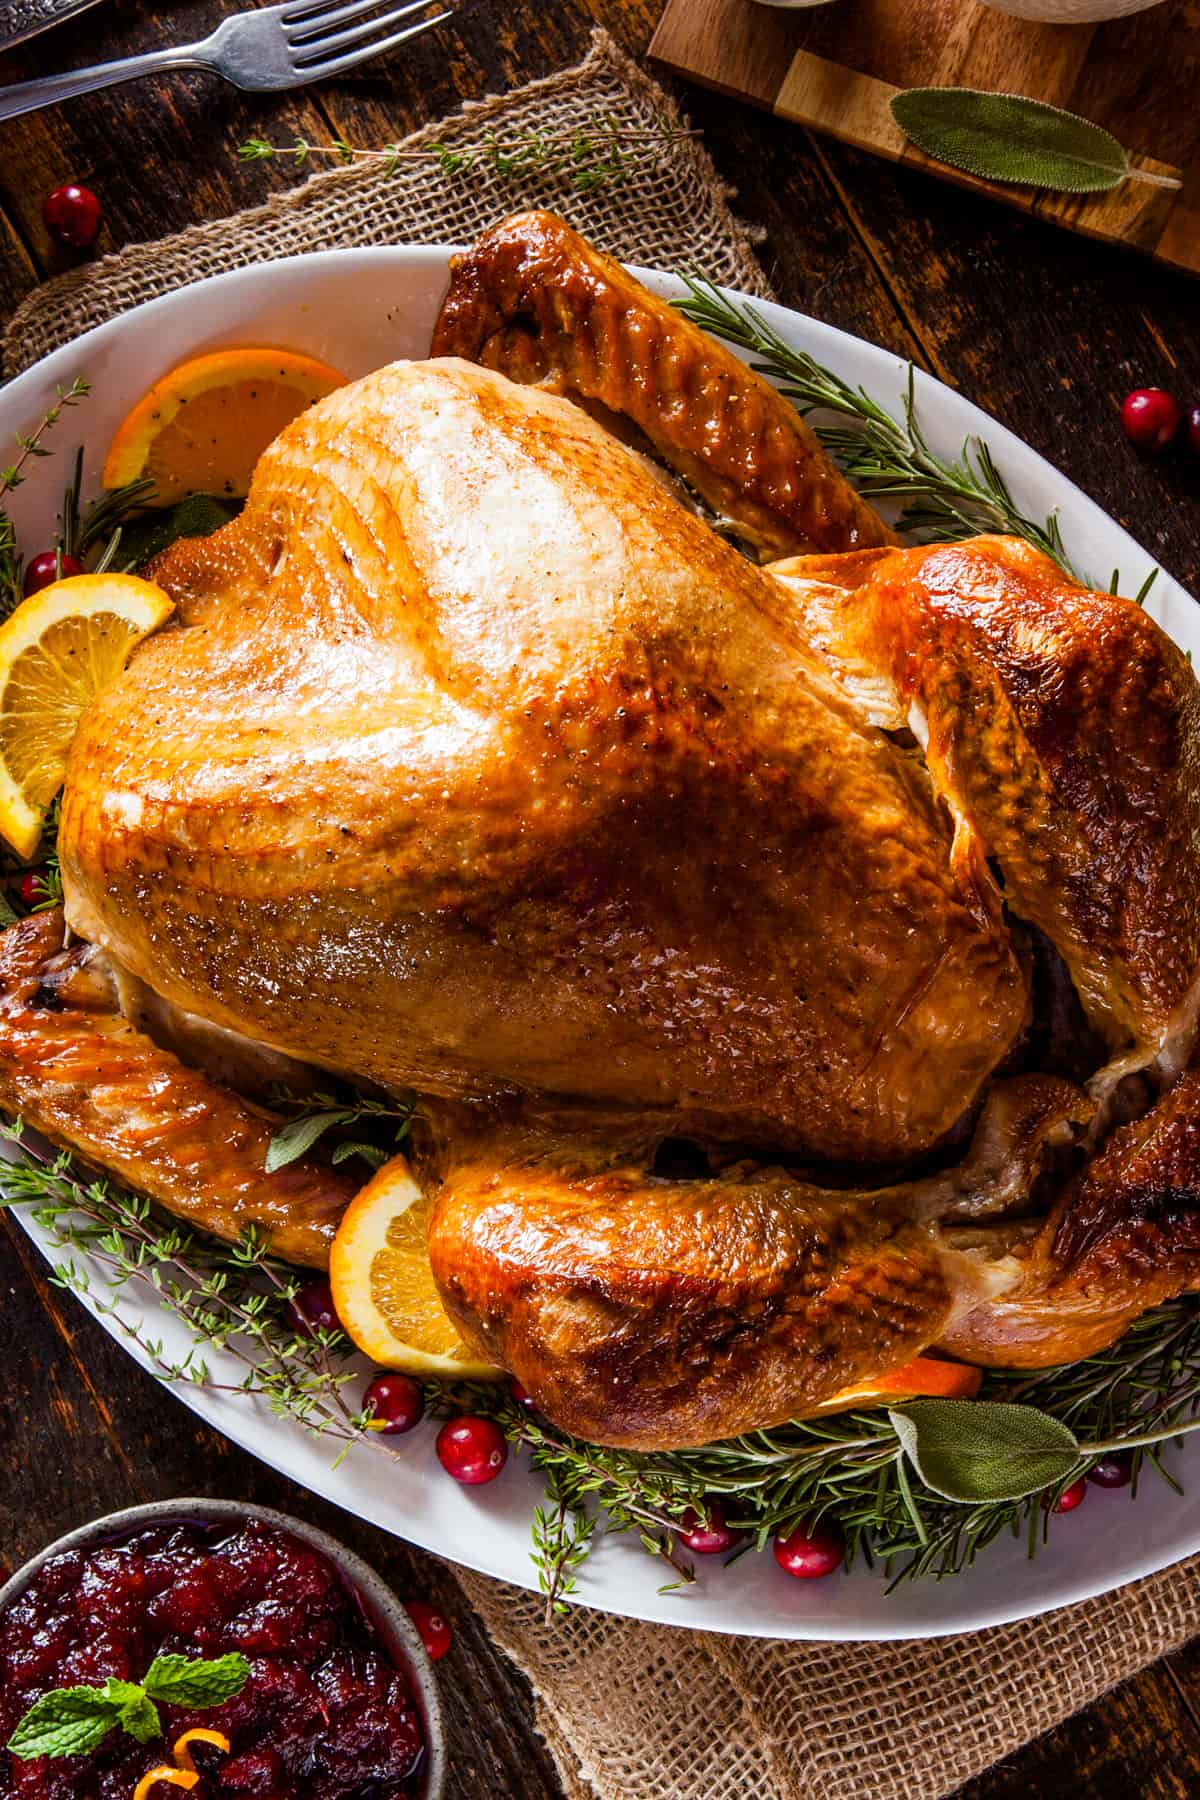 A roasted Thanksgiving turkey garnished with citrus slices and green herbs.